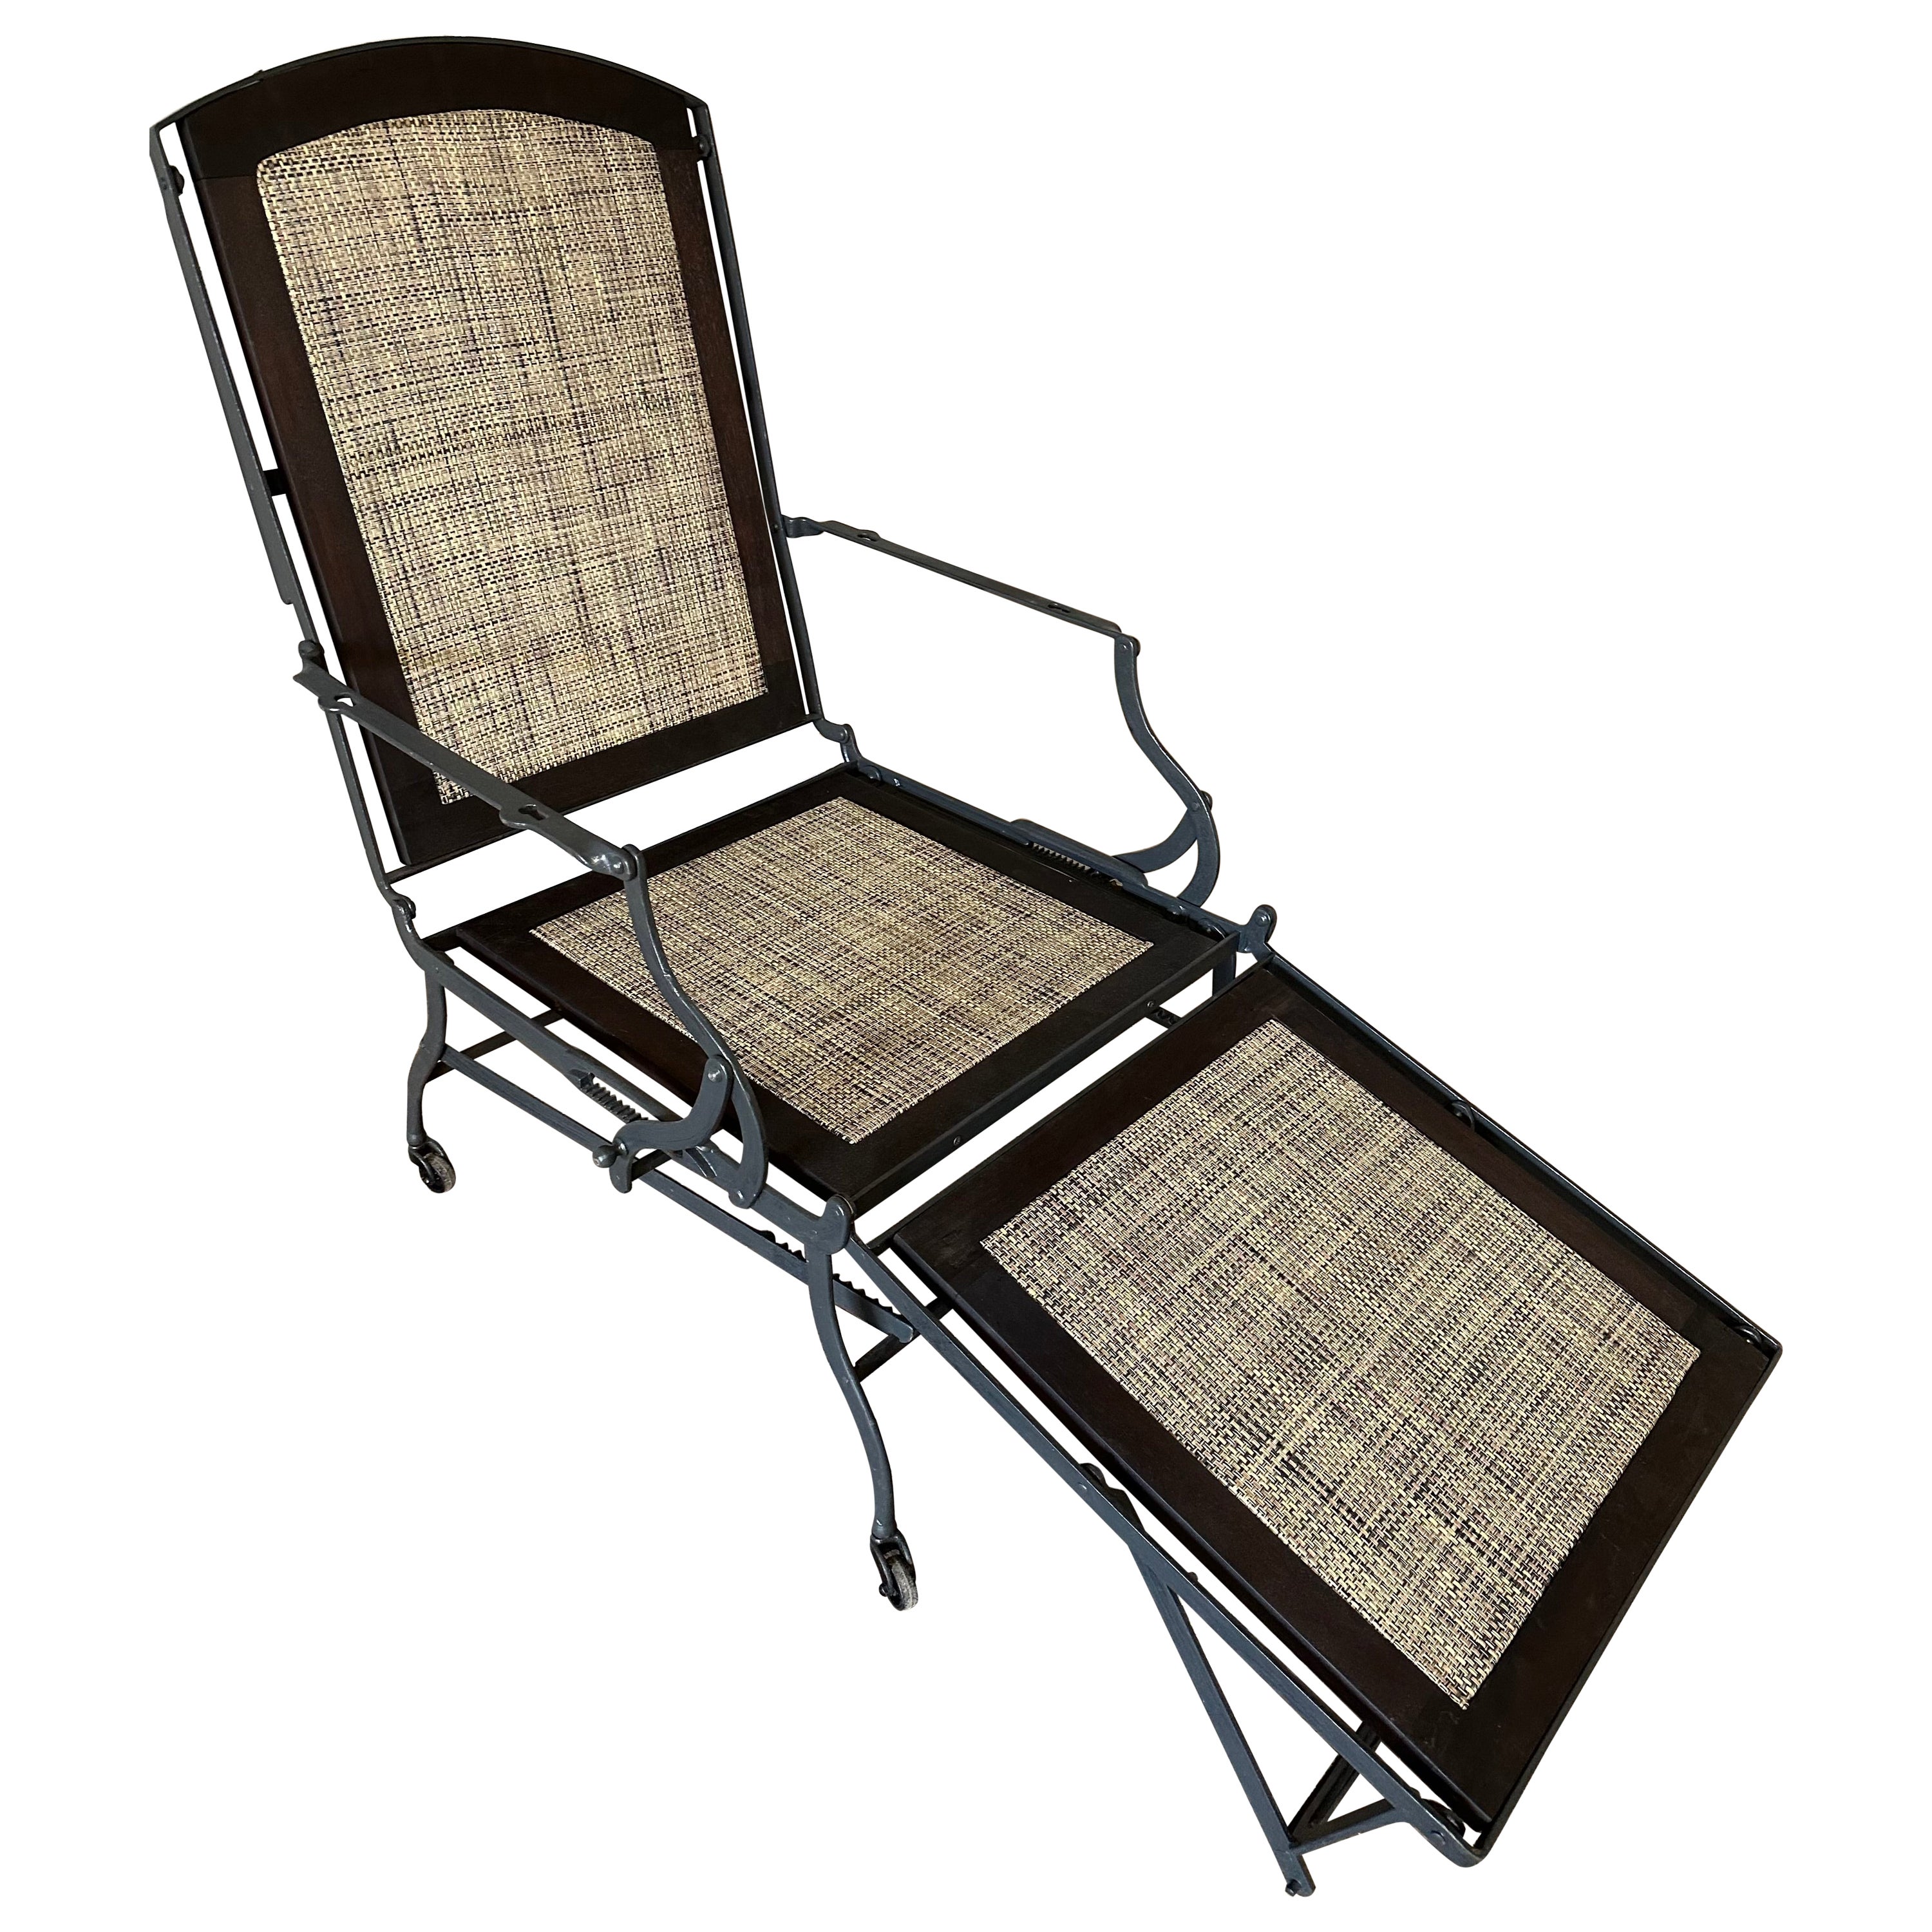 Antique Folding Lounging Deck Chair For Sale